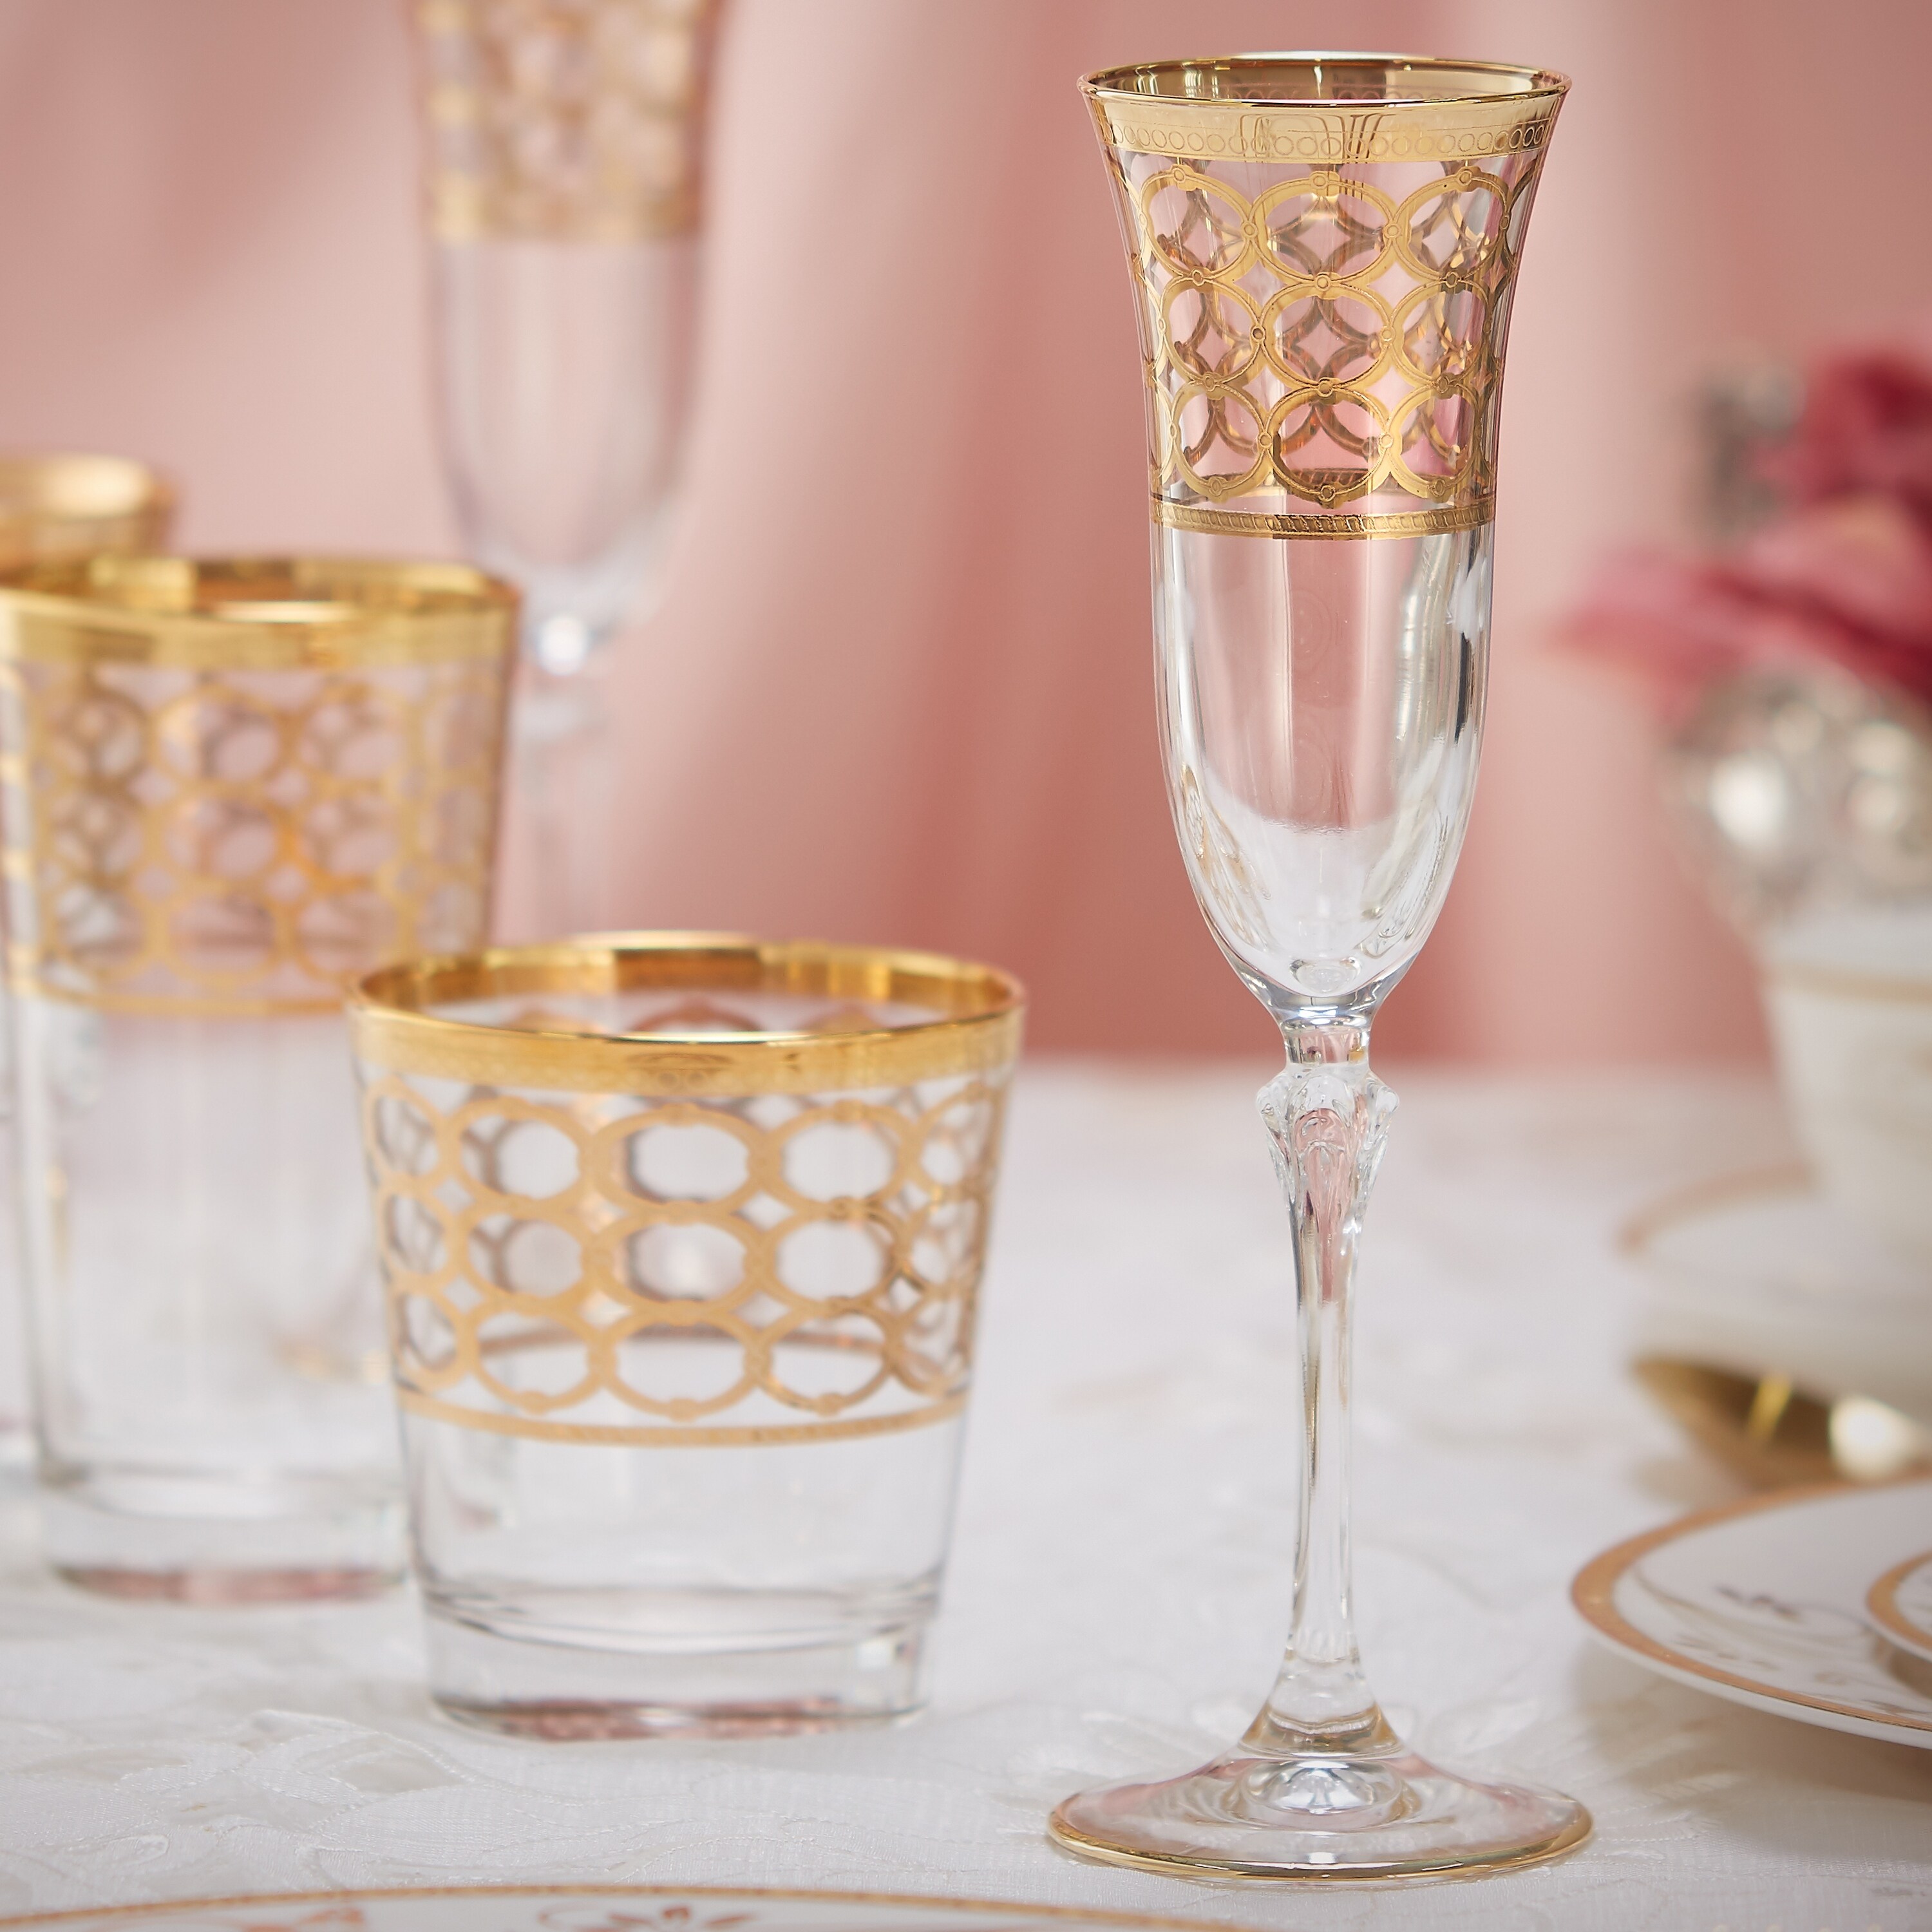 https://ak1.ostkcdn.com/images/products/is/images/direct/8fd52fc046151fc9731cea8764db88308c11a7ec/Lorren-Home-Trends-Infinity-Gold-Ring-Champagne-Flute%2C-Set-of-4.jpg